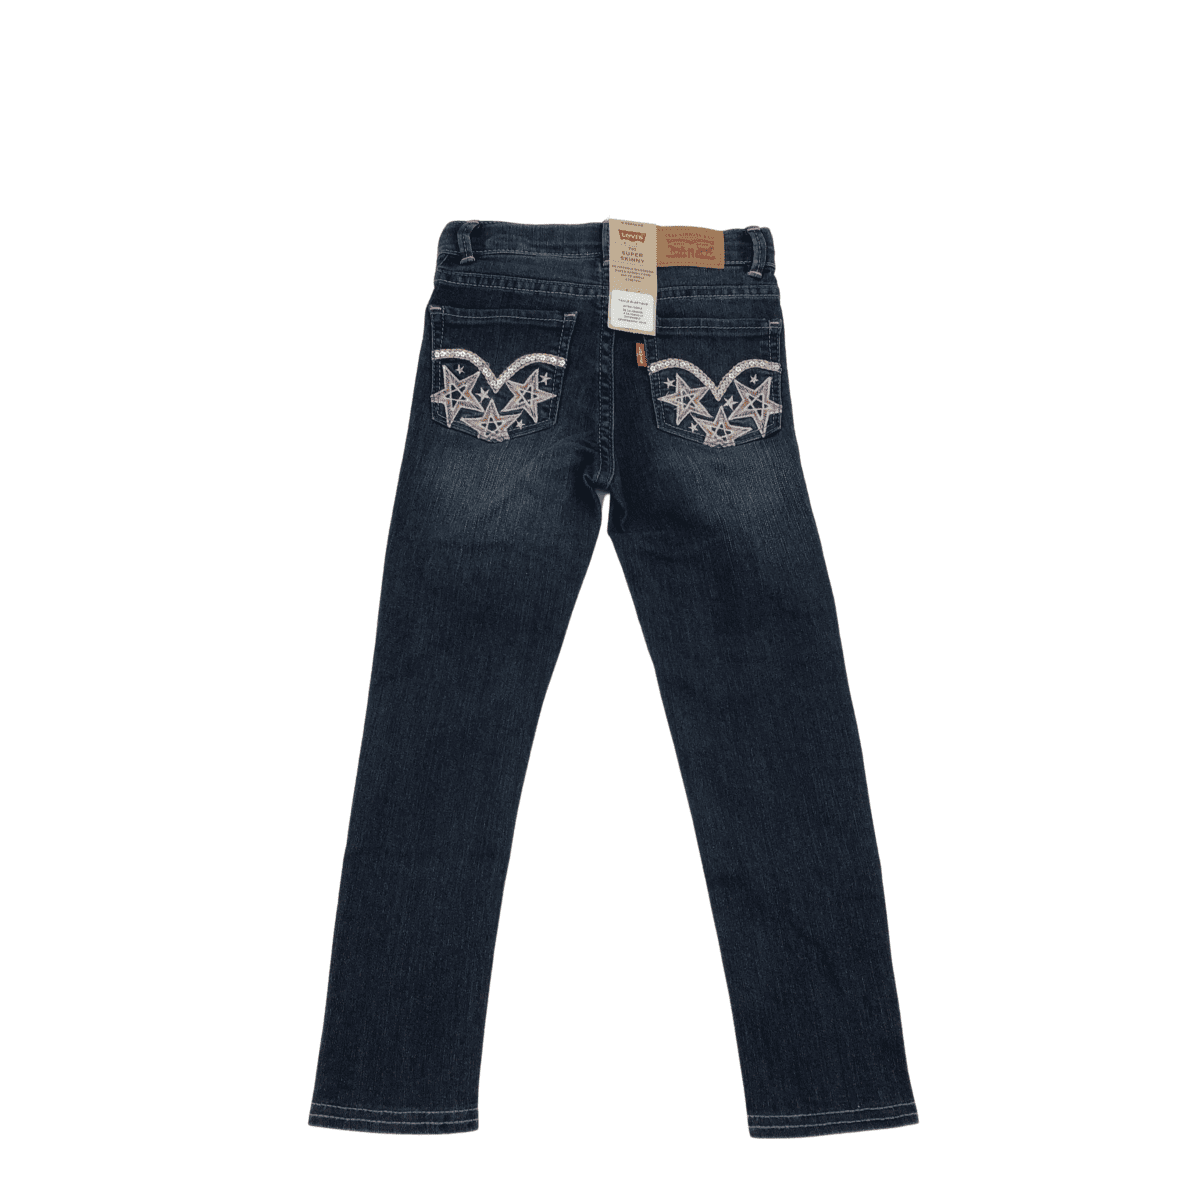 levi's girl's jeans 02